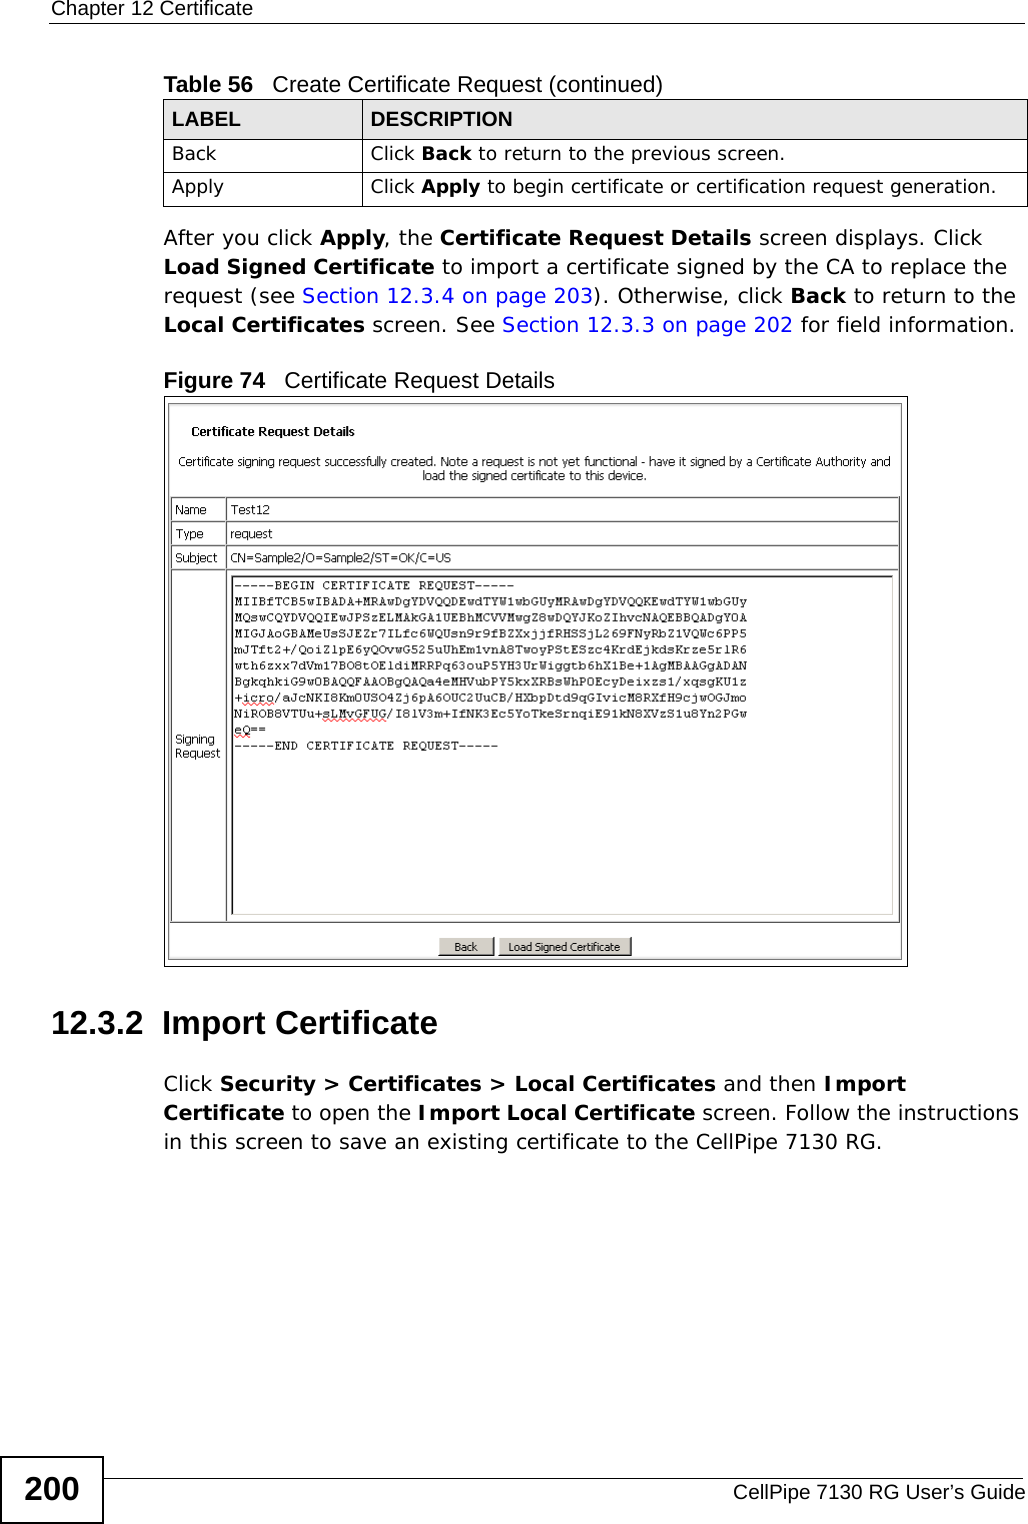 Chapter 12 CertificateCellPipe 7130 RG User’s Guide200After you click Apply, the Certificate Request Details screen displays. Click Load Signed Certificate to import a certificate signed by the CA to replace the request (see Section 12.3.4 on page 203). Otherwise, click Back to return to the Local Certificates screen. See Section 12.3.3 on page 202 for field information.Figure 74   Certificate Request Details12.3.2  Import Certificate Click Security &gt; Certificates &gt; Local Certificates and then Import Certificate to open the Import Local Certificate screen. Follow the instructions in this screen to save an existing certificate to the CellPipe 7130 RG. Back Click Back to return to the previous screen.Apply Click Apply to begin certificate or certification request generation.Table 56   Create Certificate Request (continued)LABEL DESCRIPTION